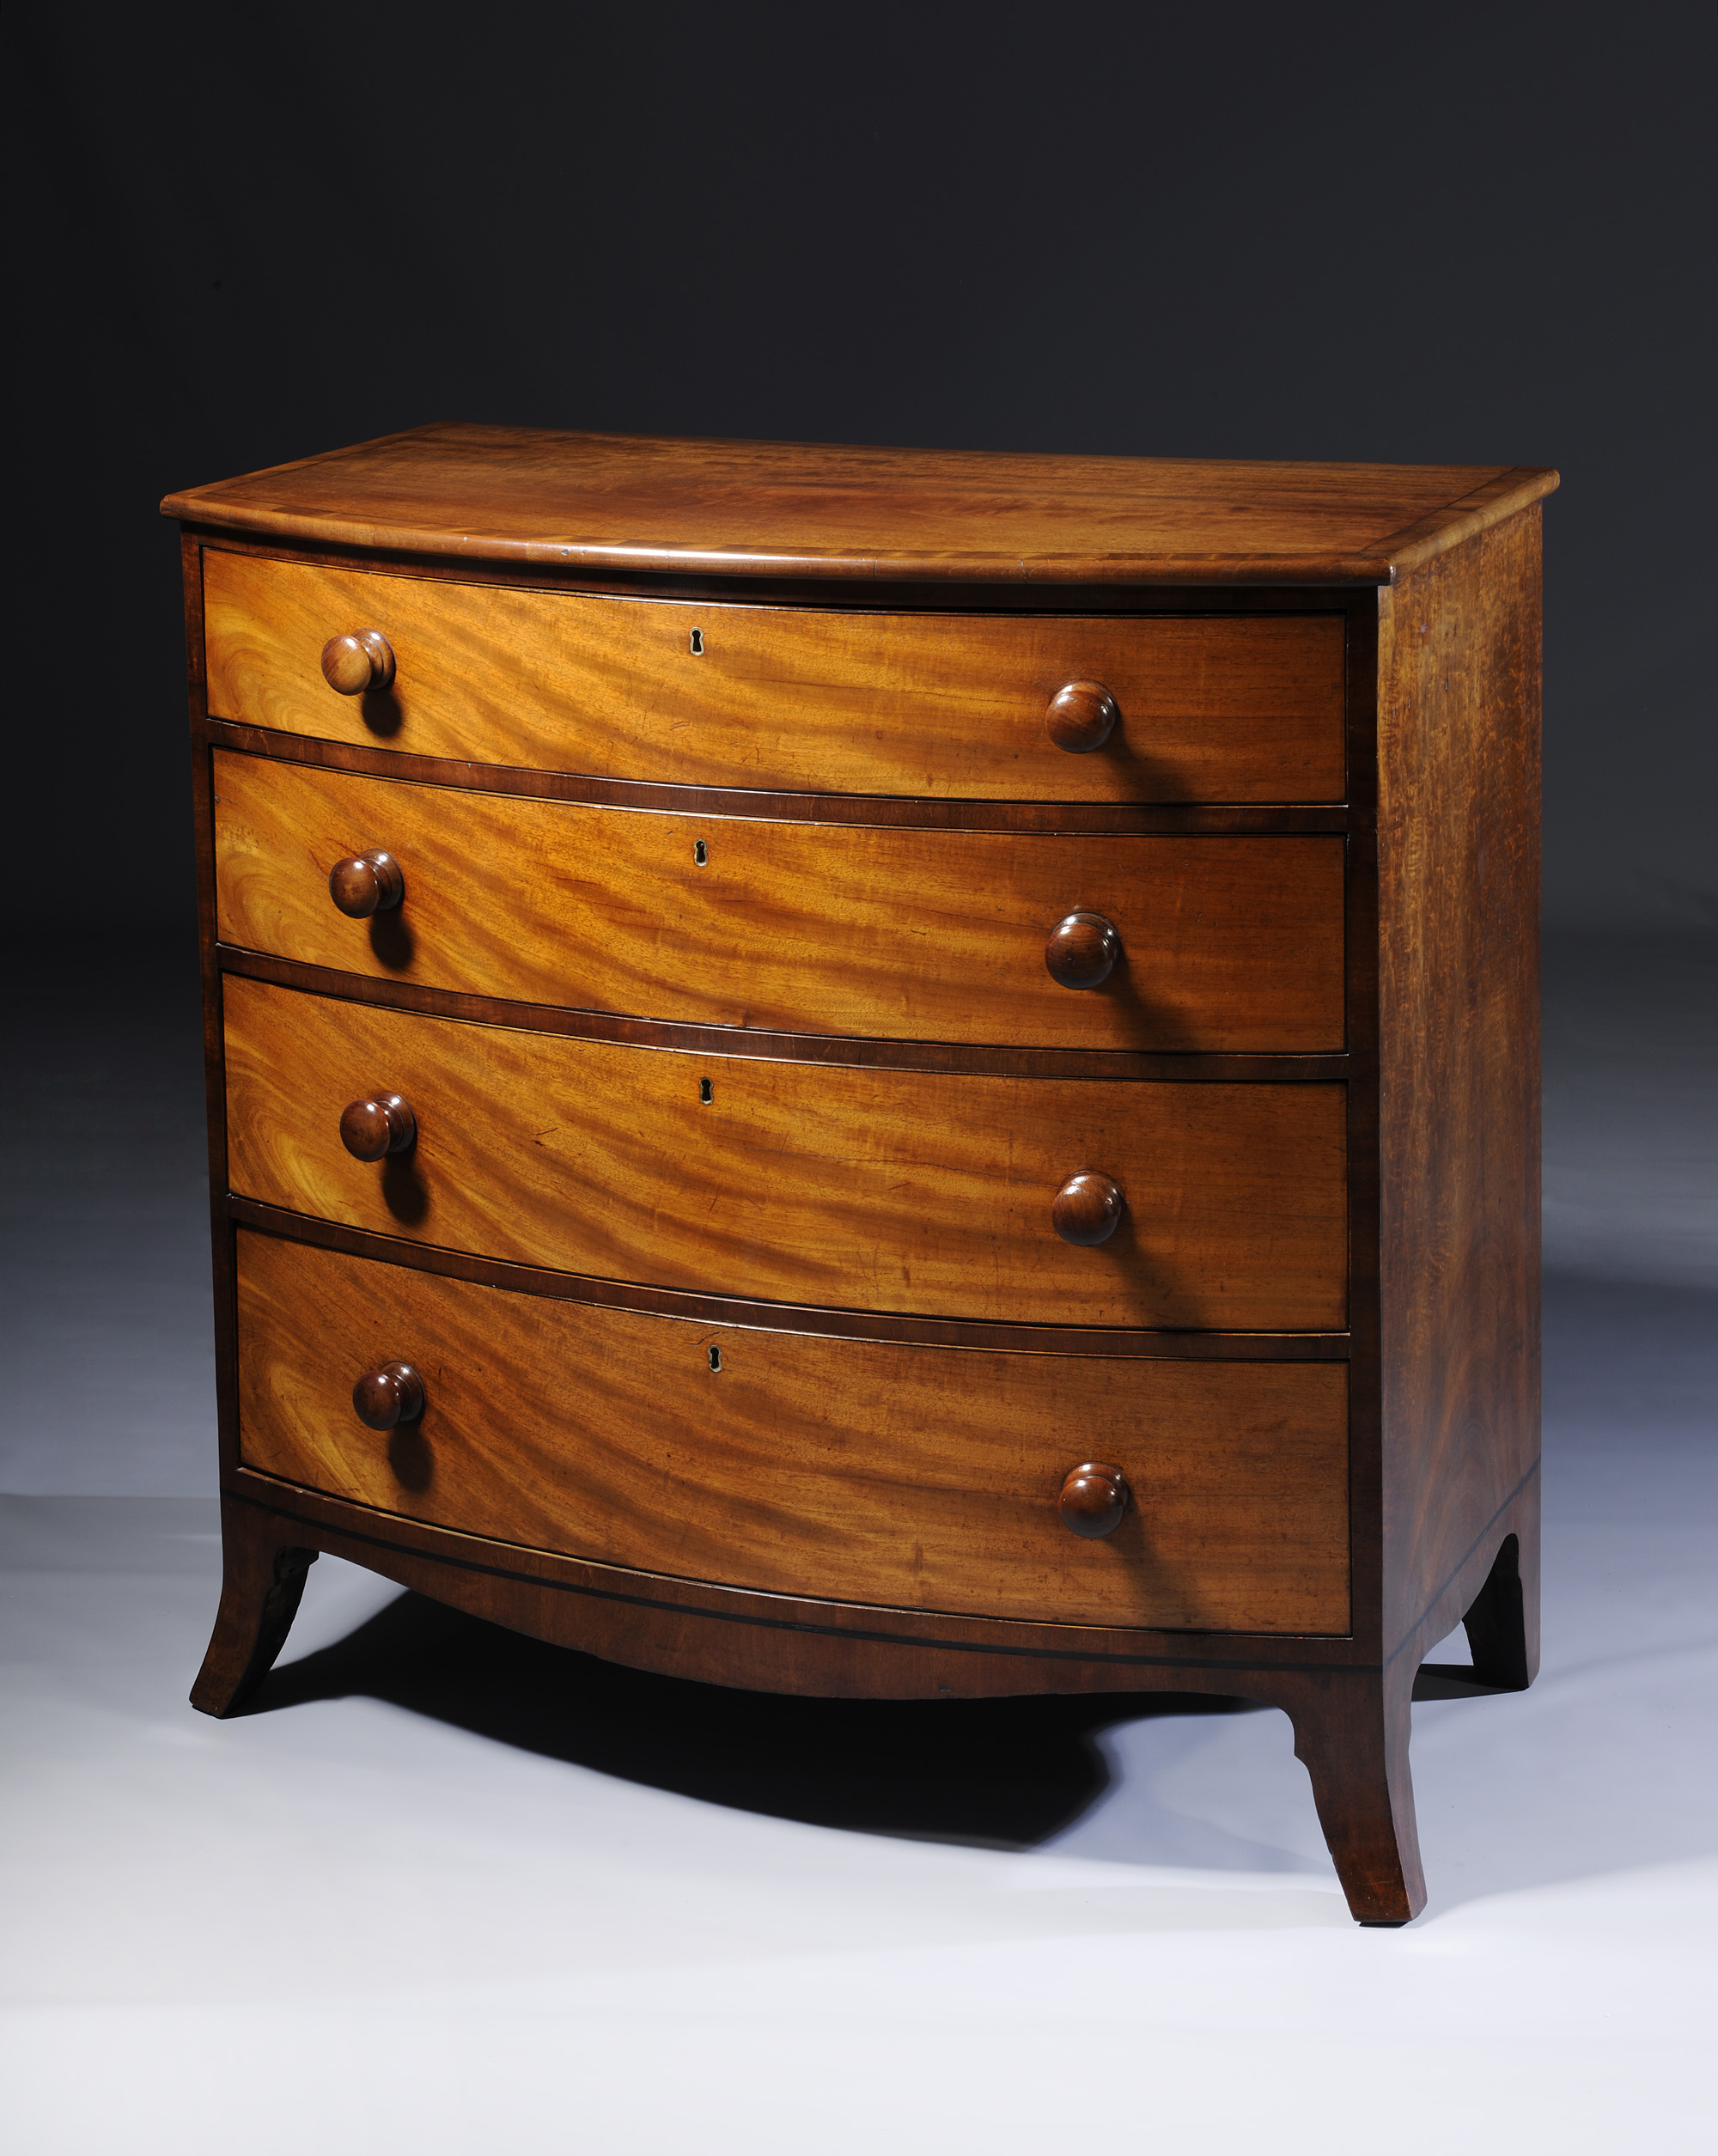 Ottery Antique Furniture - Mahogany Bow fronted chest of drawers (Antique Chests For Sale)